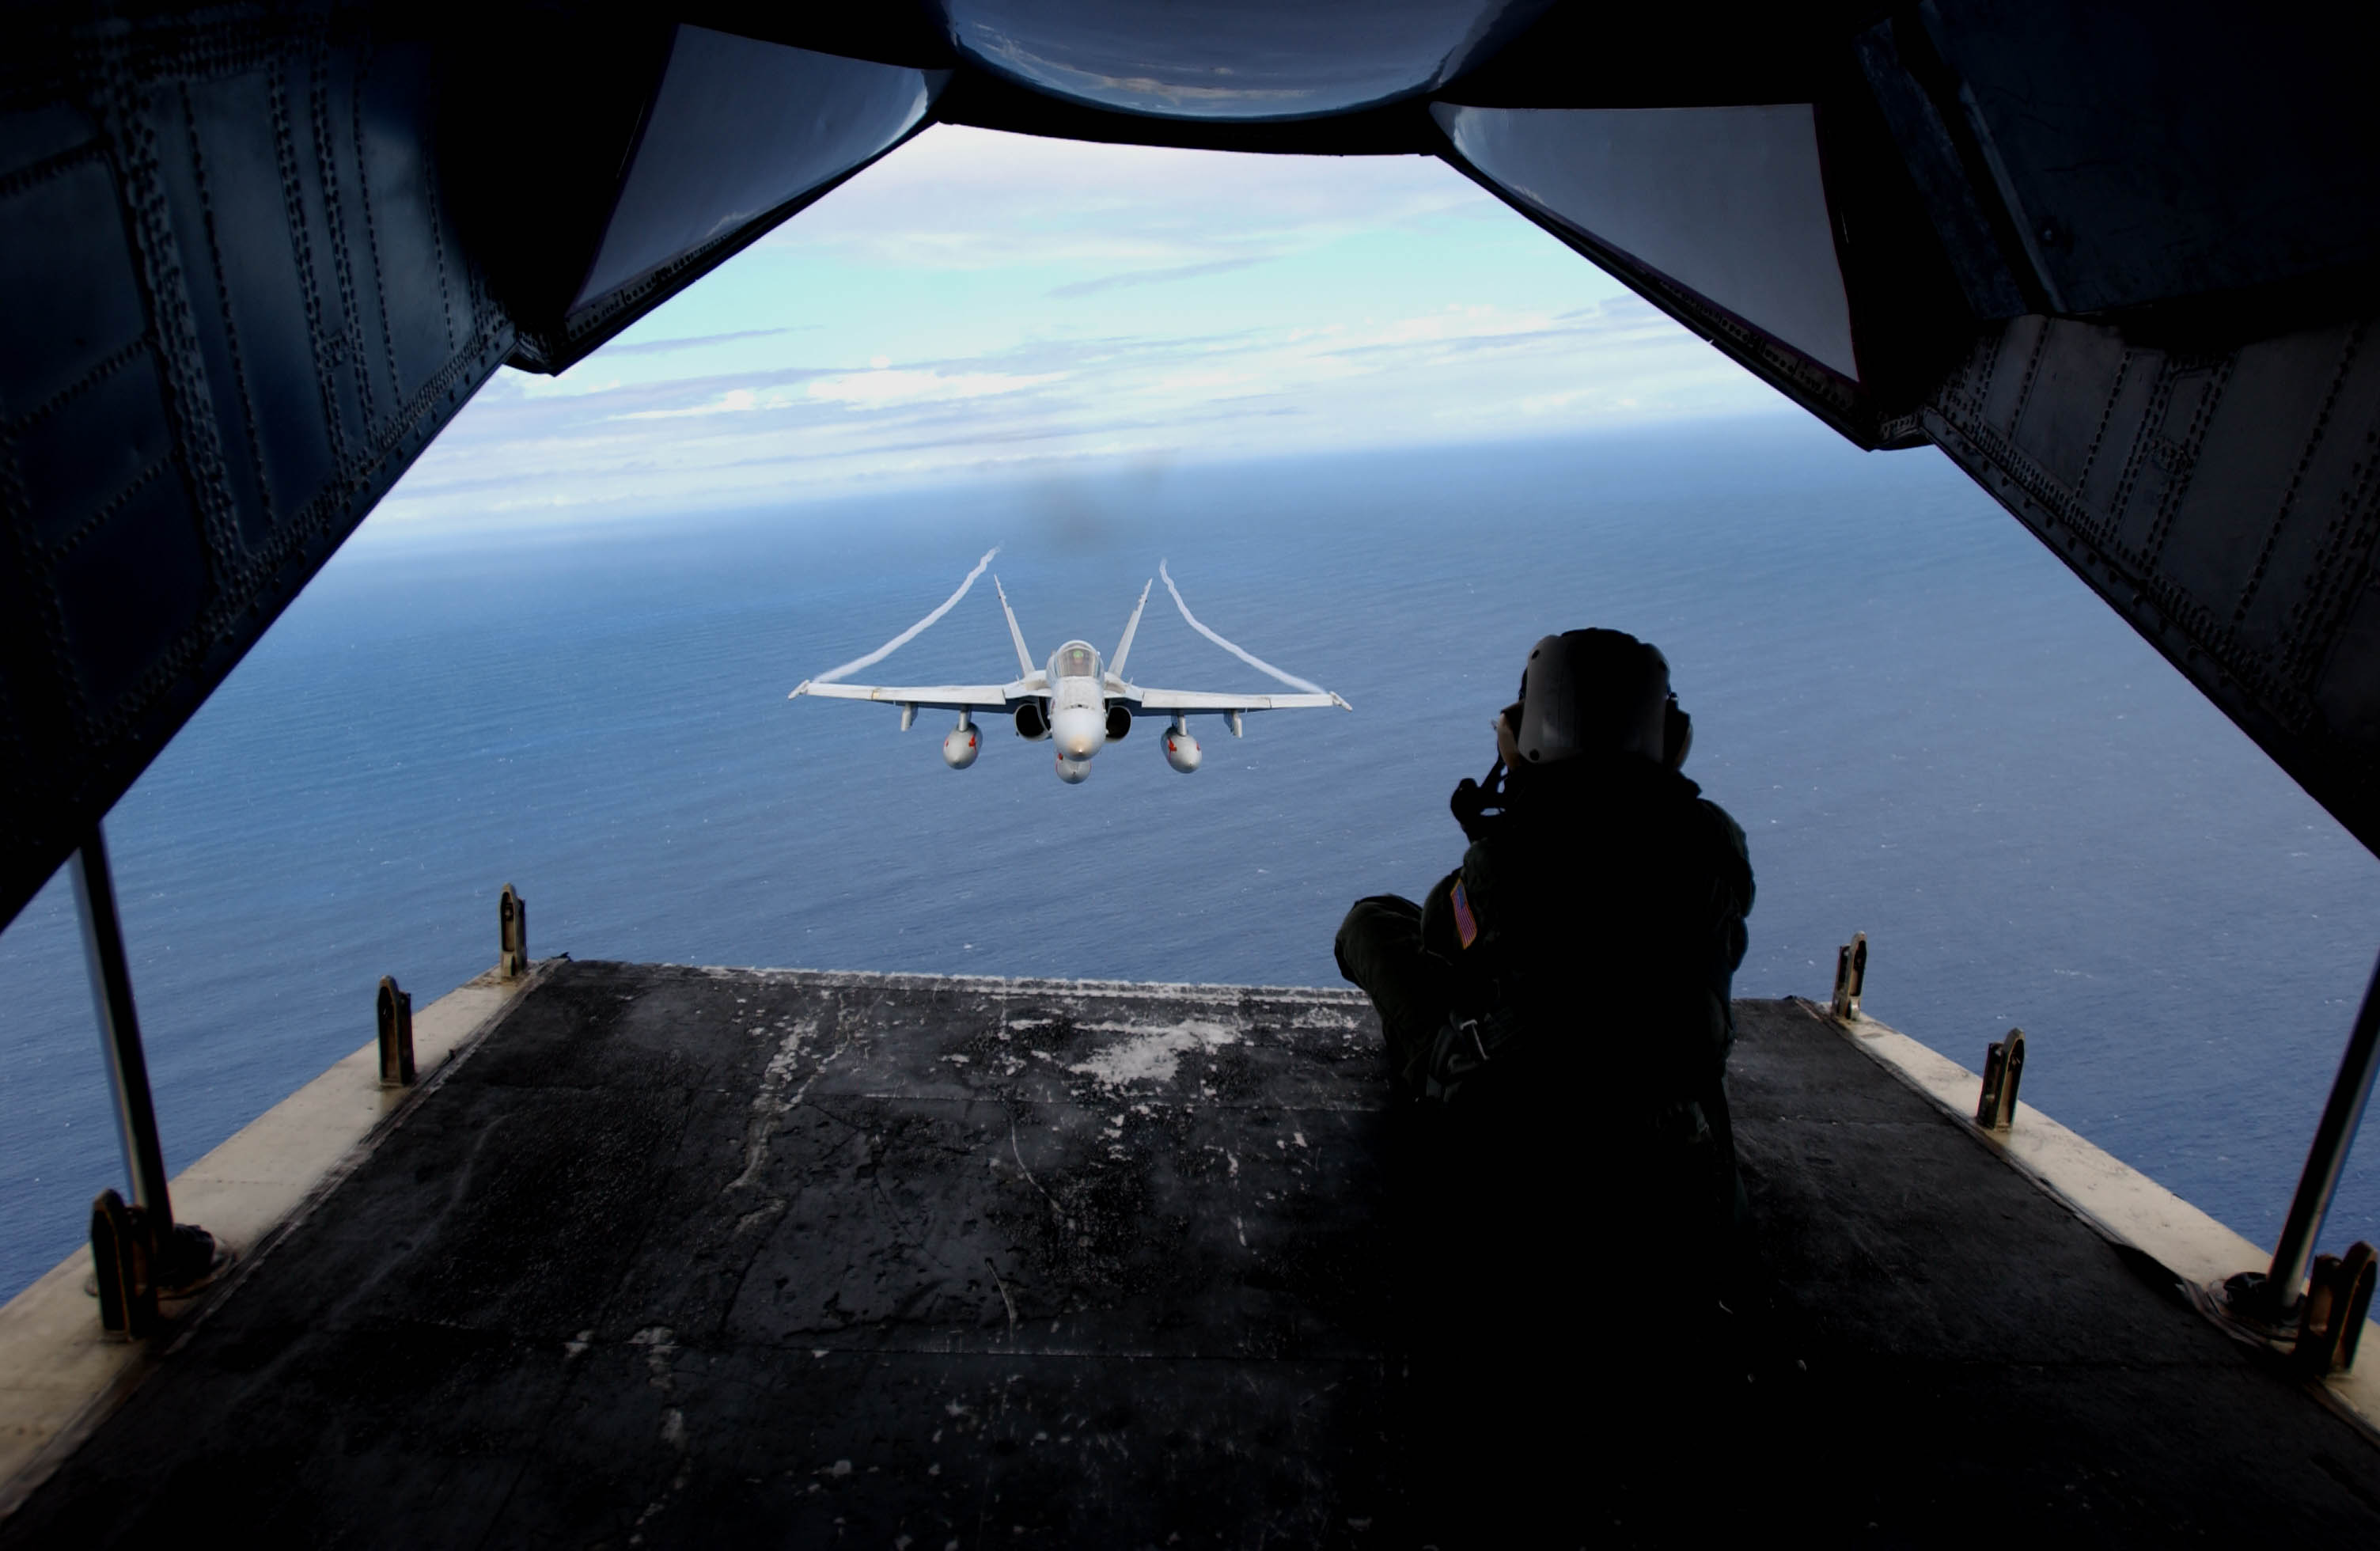 US Navy 031025-N-9411J-010 Photographer^rsquo,s Mate 3rd Class Beth Thompson, from San Francisco, Calif., photographs an F-A-18 Hornet